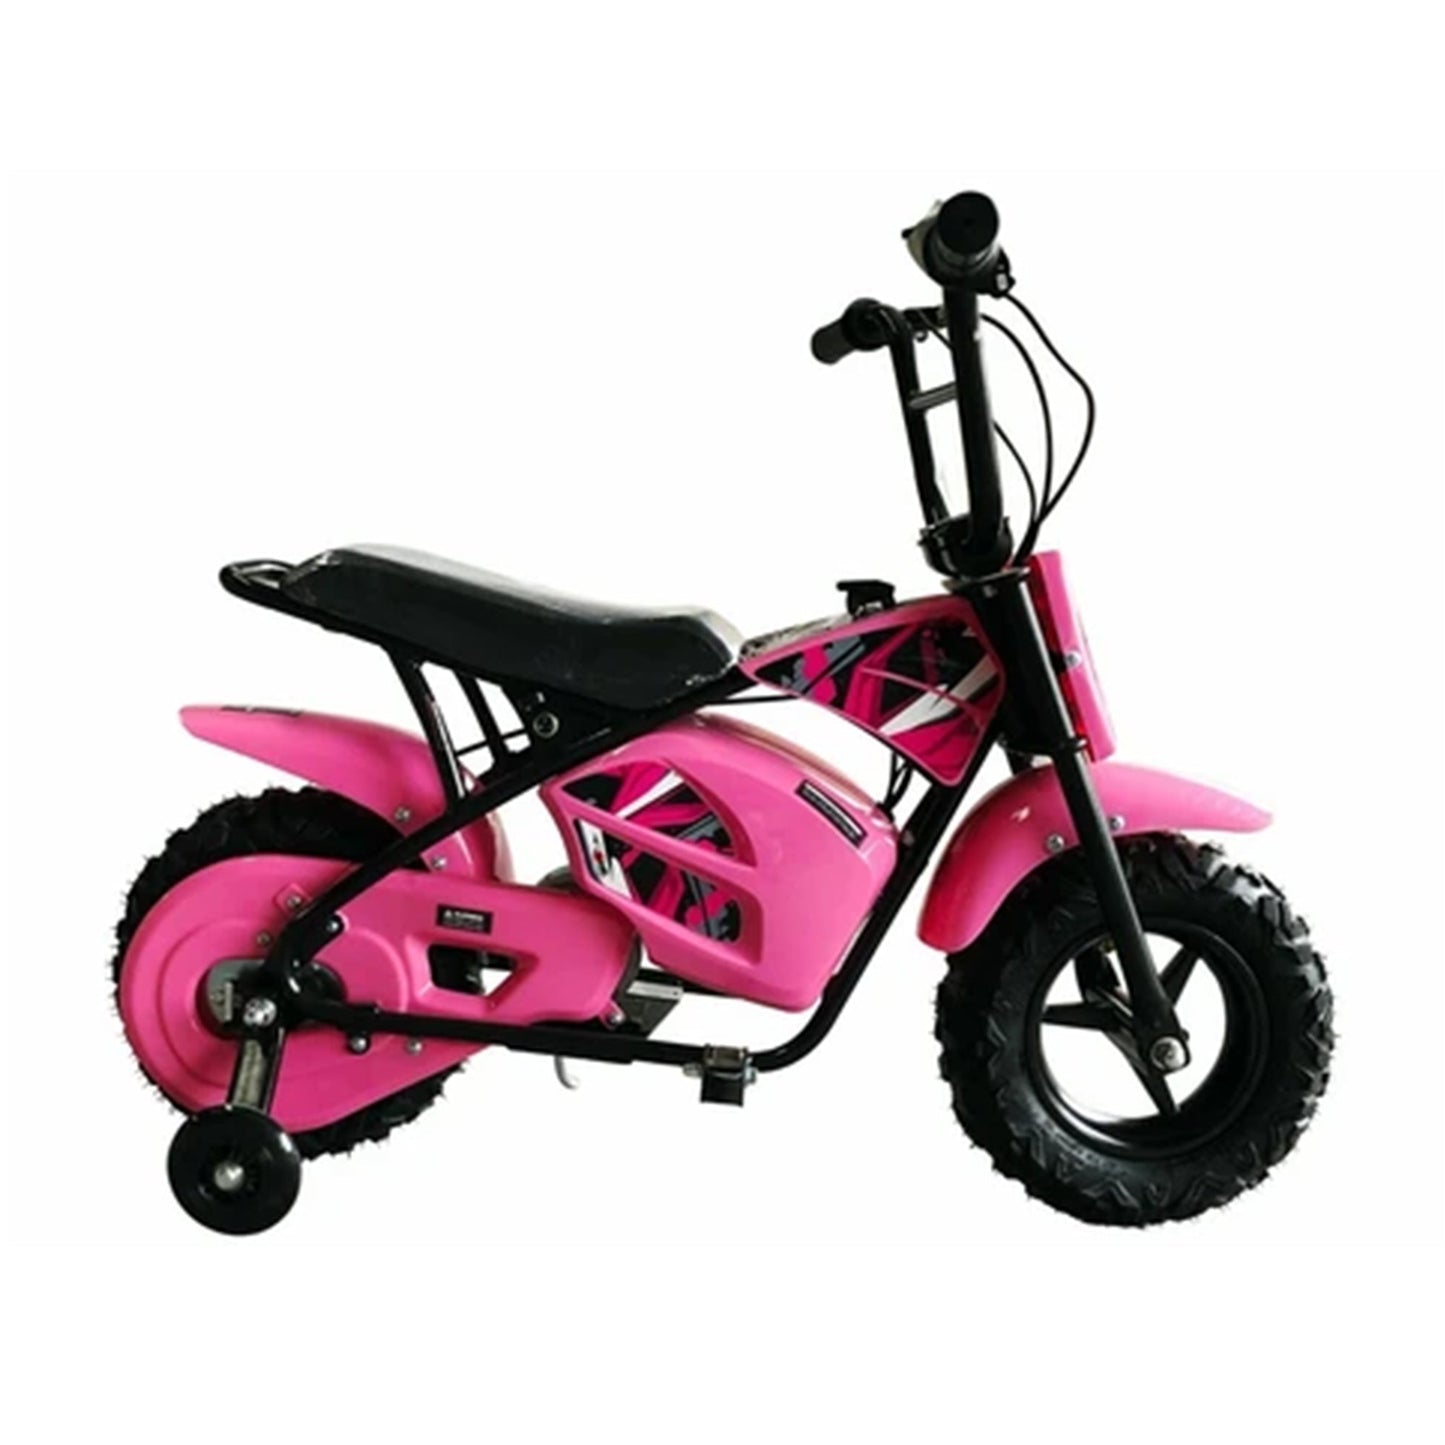 "Pink mini electric ride-on dirtbike for kids, equipped with stabilisers, 250 watt and 12 volts on a white background."